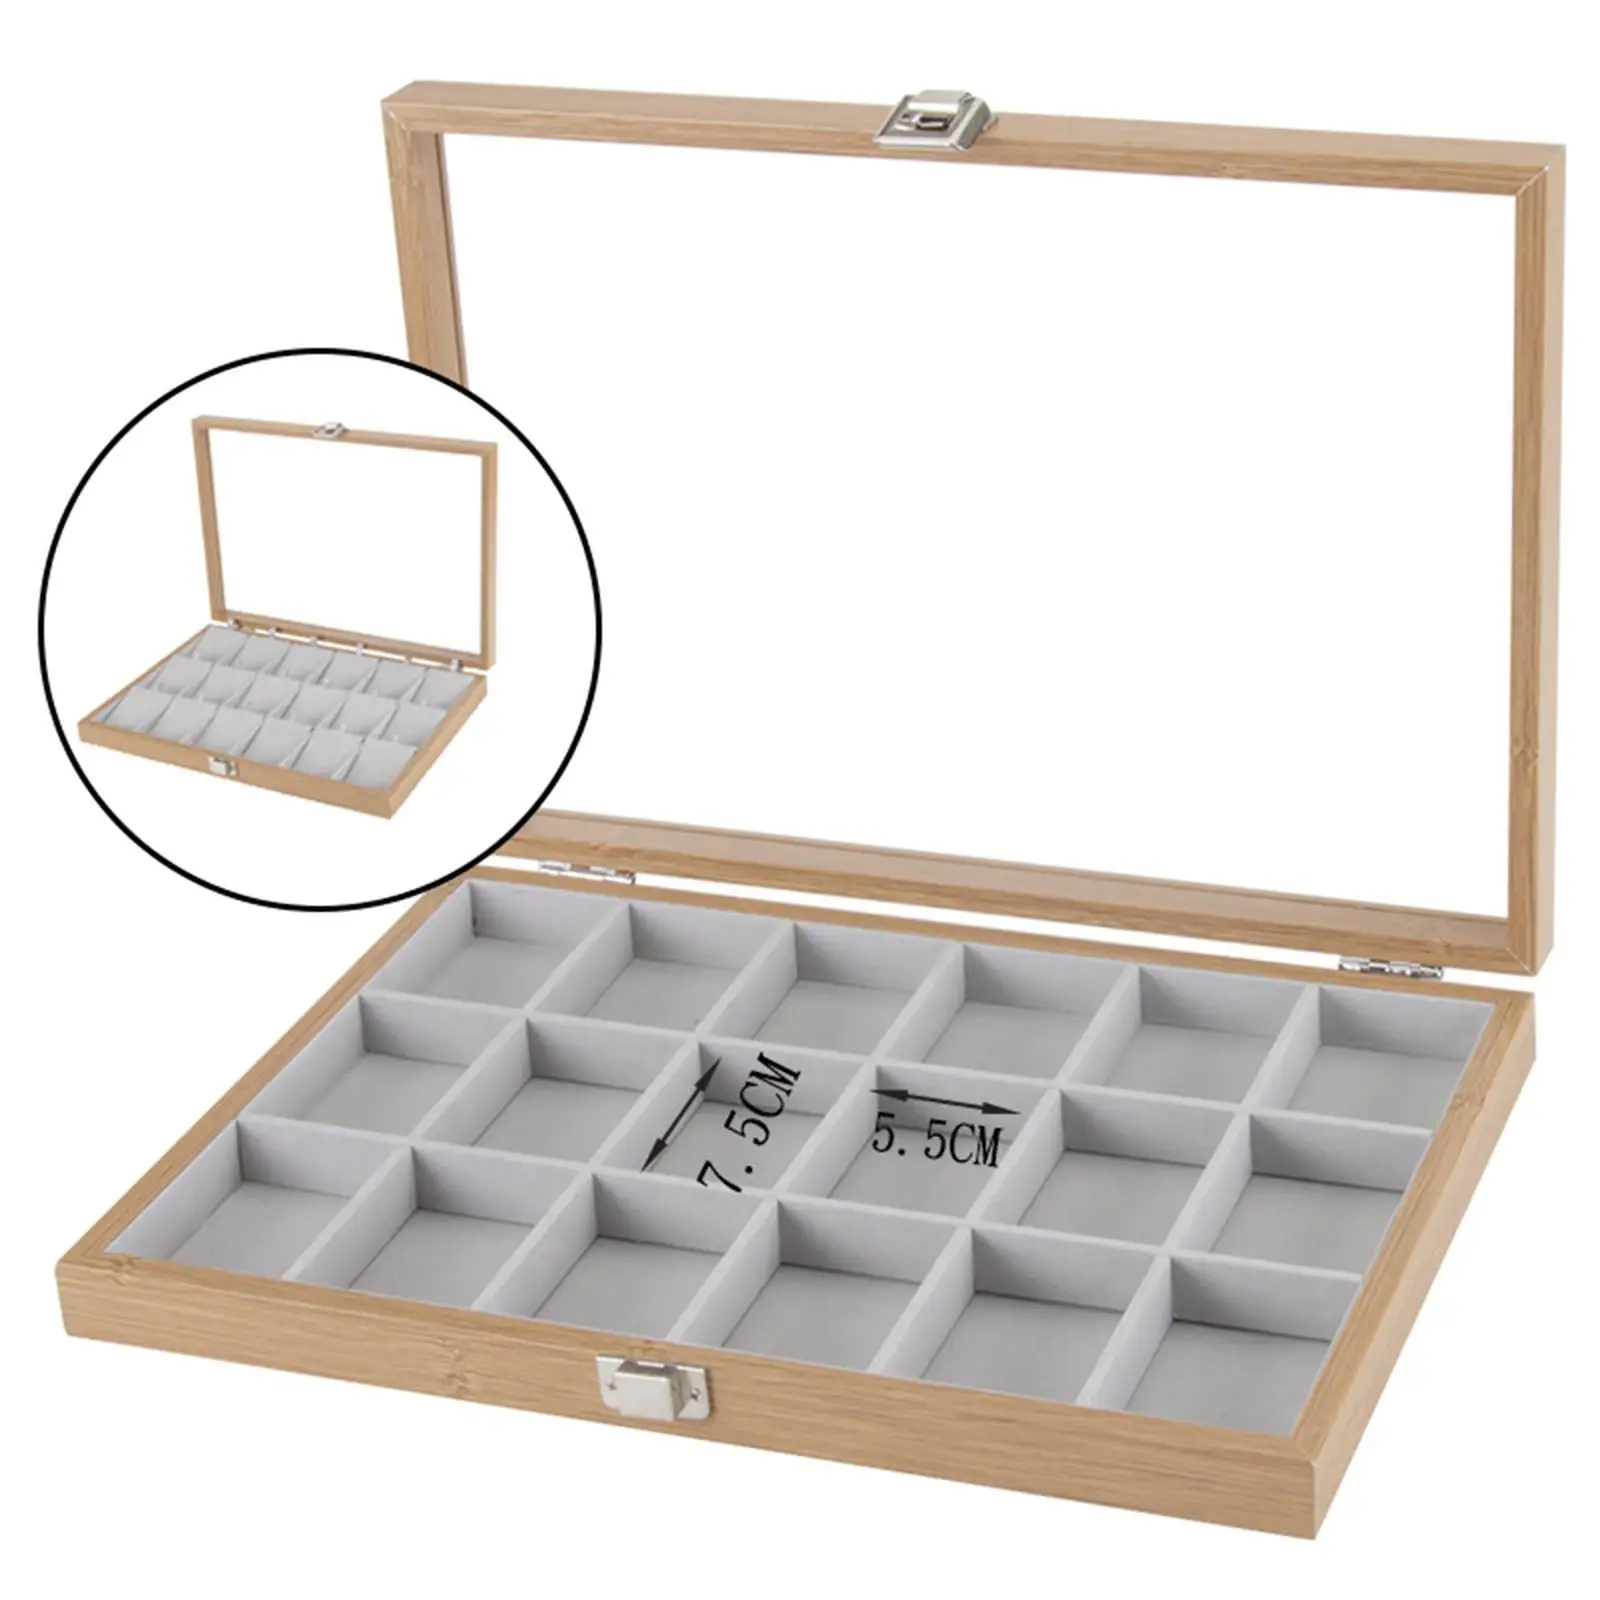 18 Grids Earrings Necklace Jewelry Display Storage Organizer Tray Holder